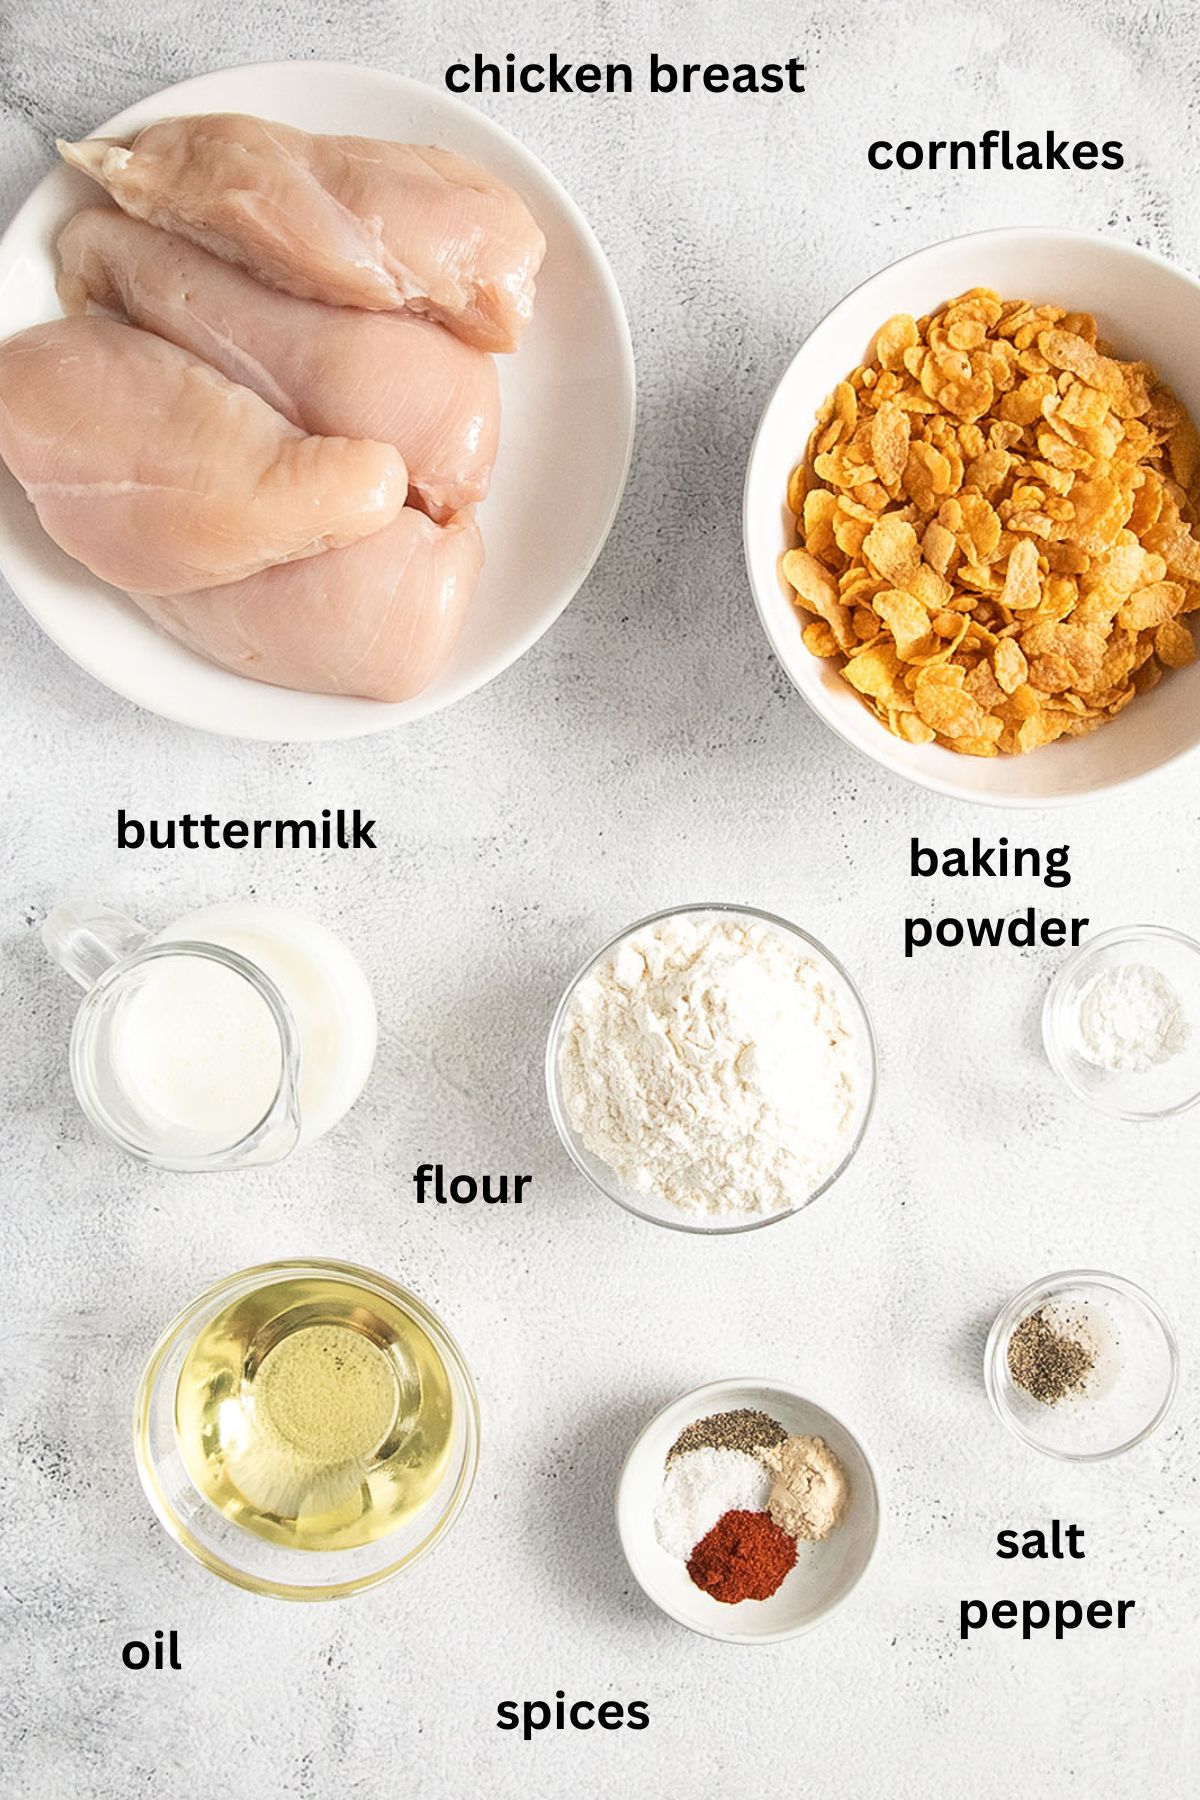 listed ingredients for making chicken with double cornflake coating.